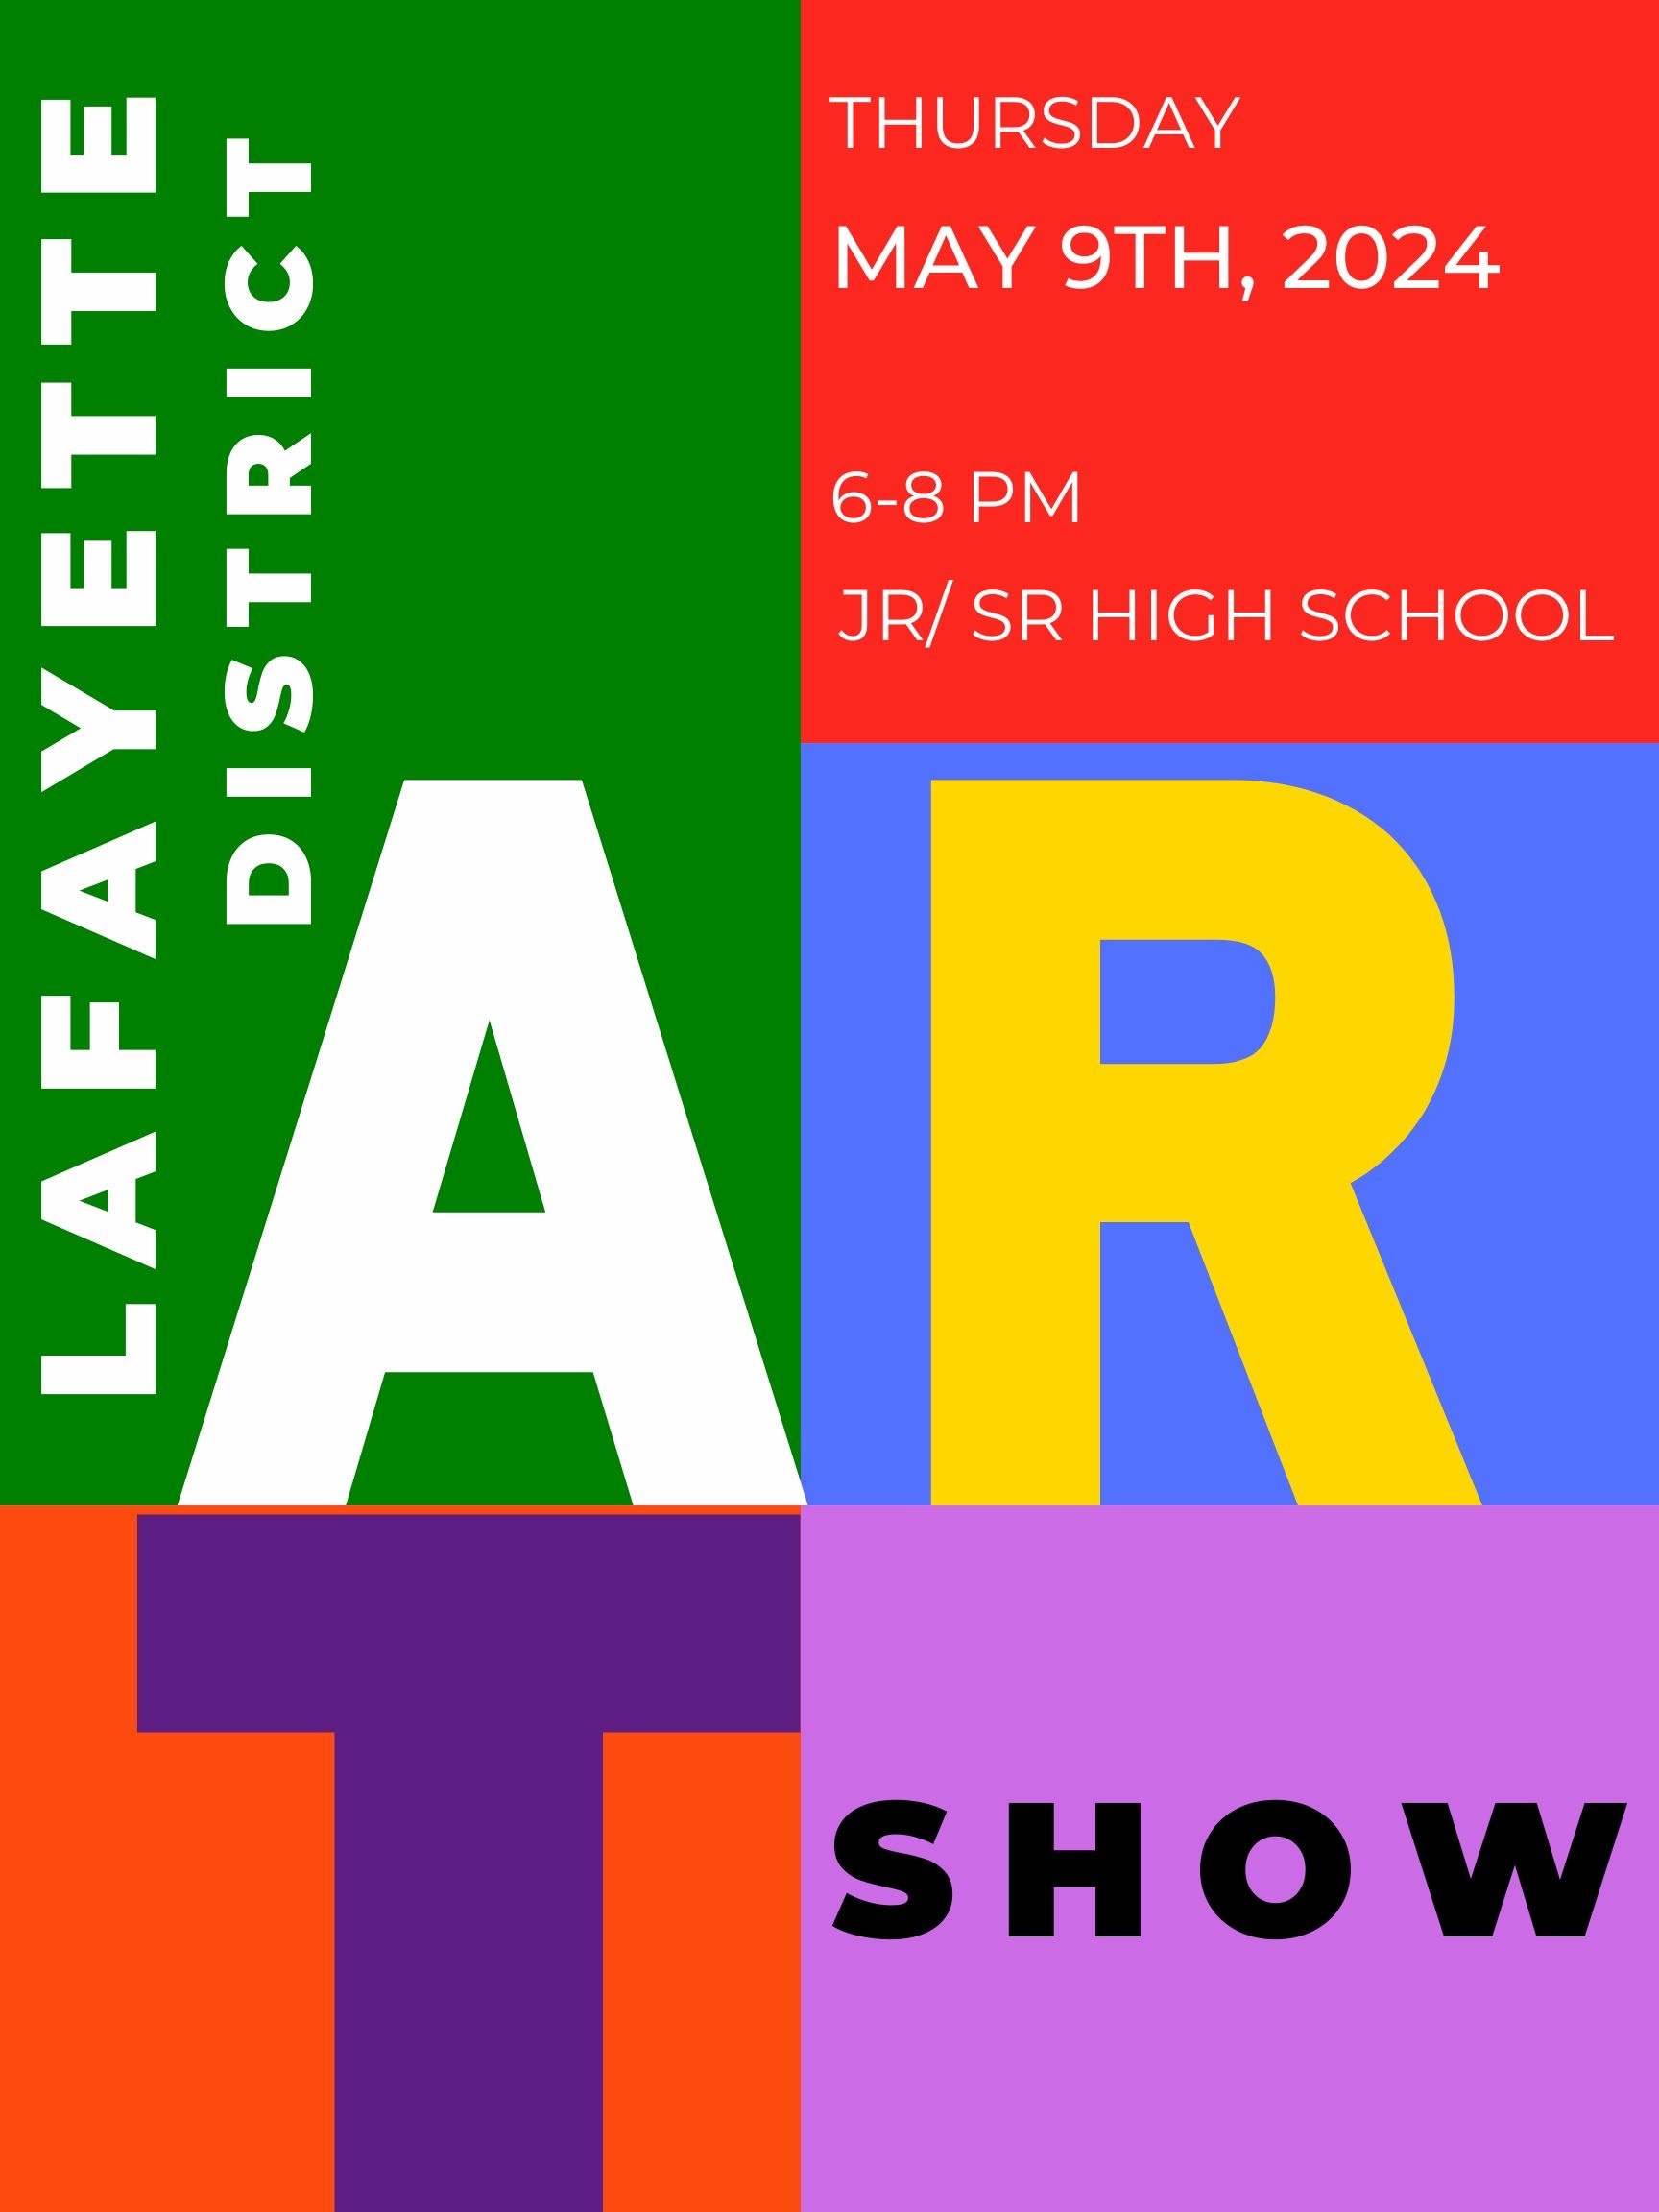 district to host art show on may 9 from 6-8 p.m. Features work from students in grades pre-K through 12